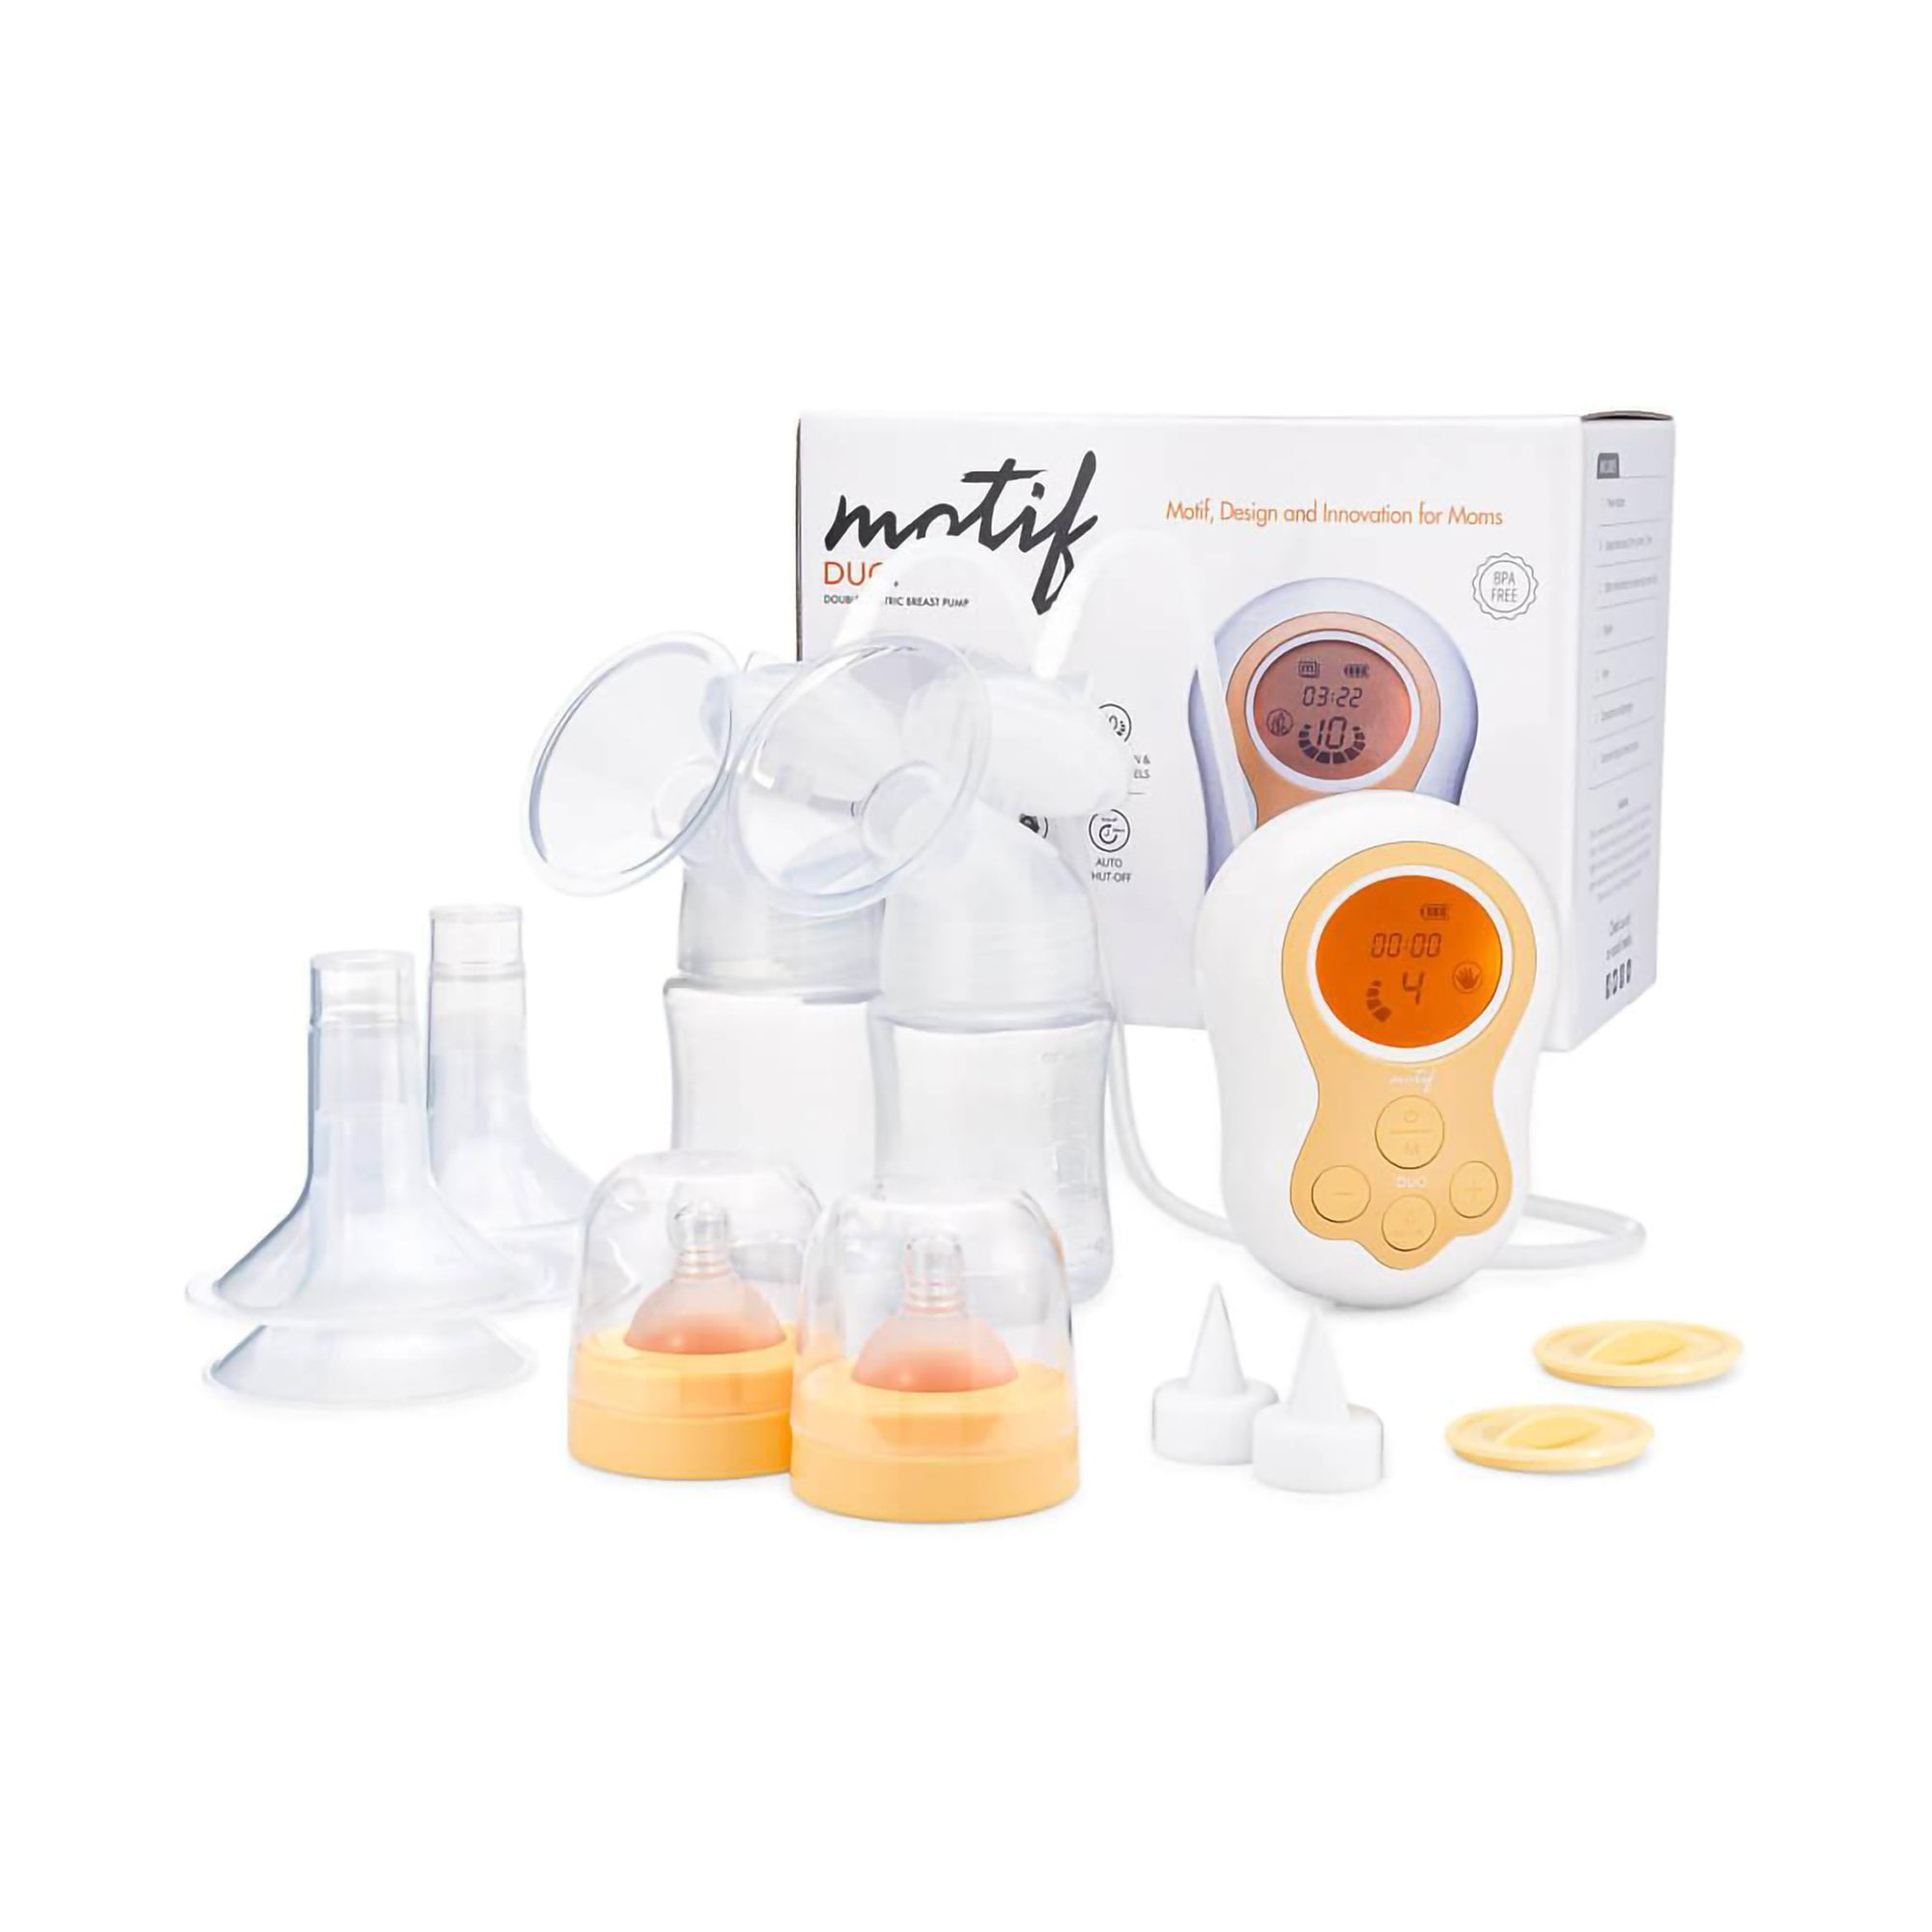 Motif Duo Double Electric Breast Pump with hands free pumping bra